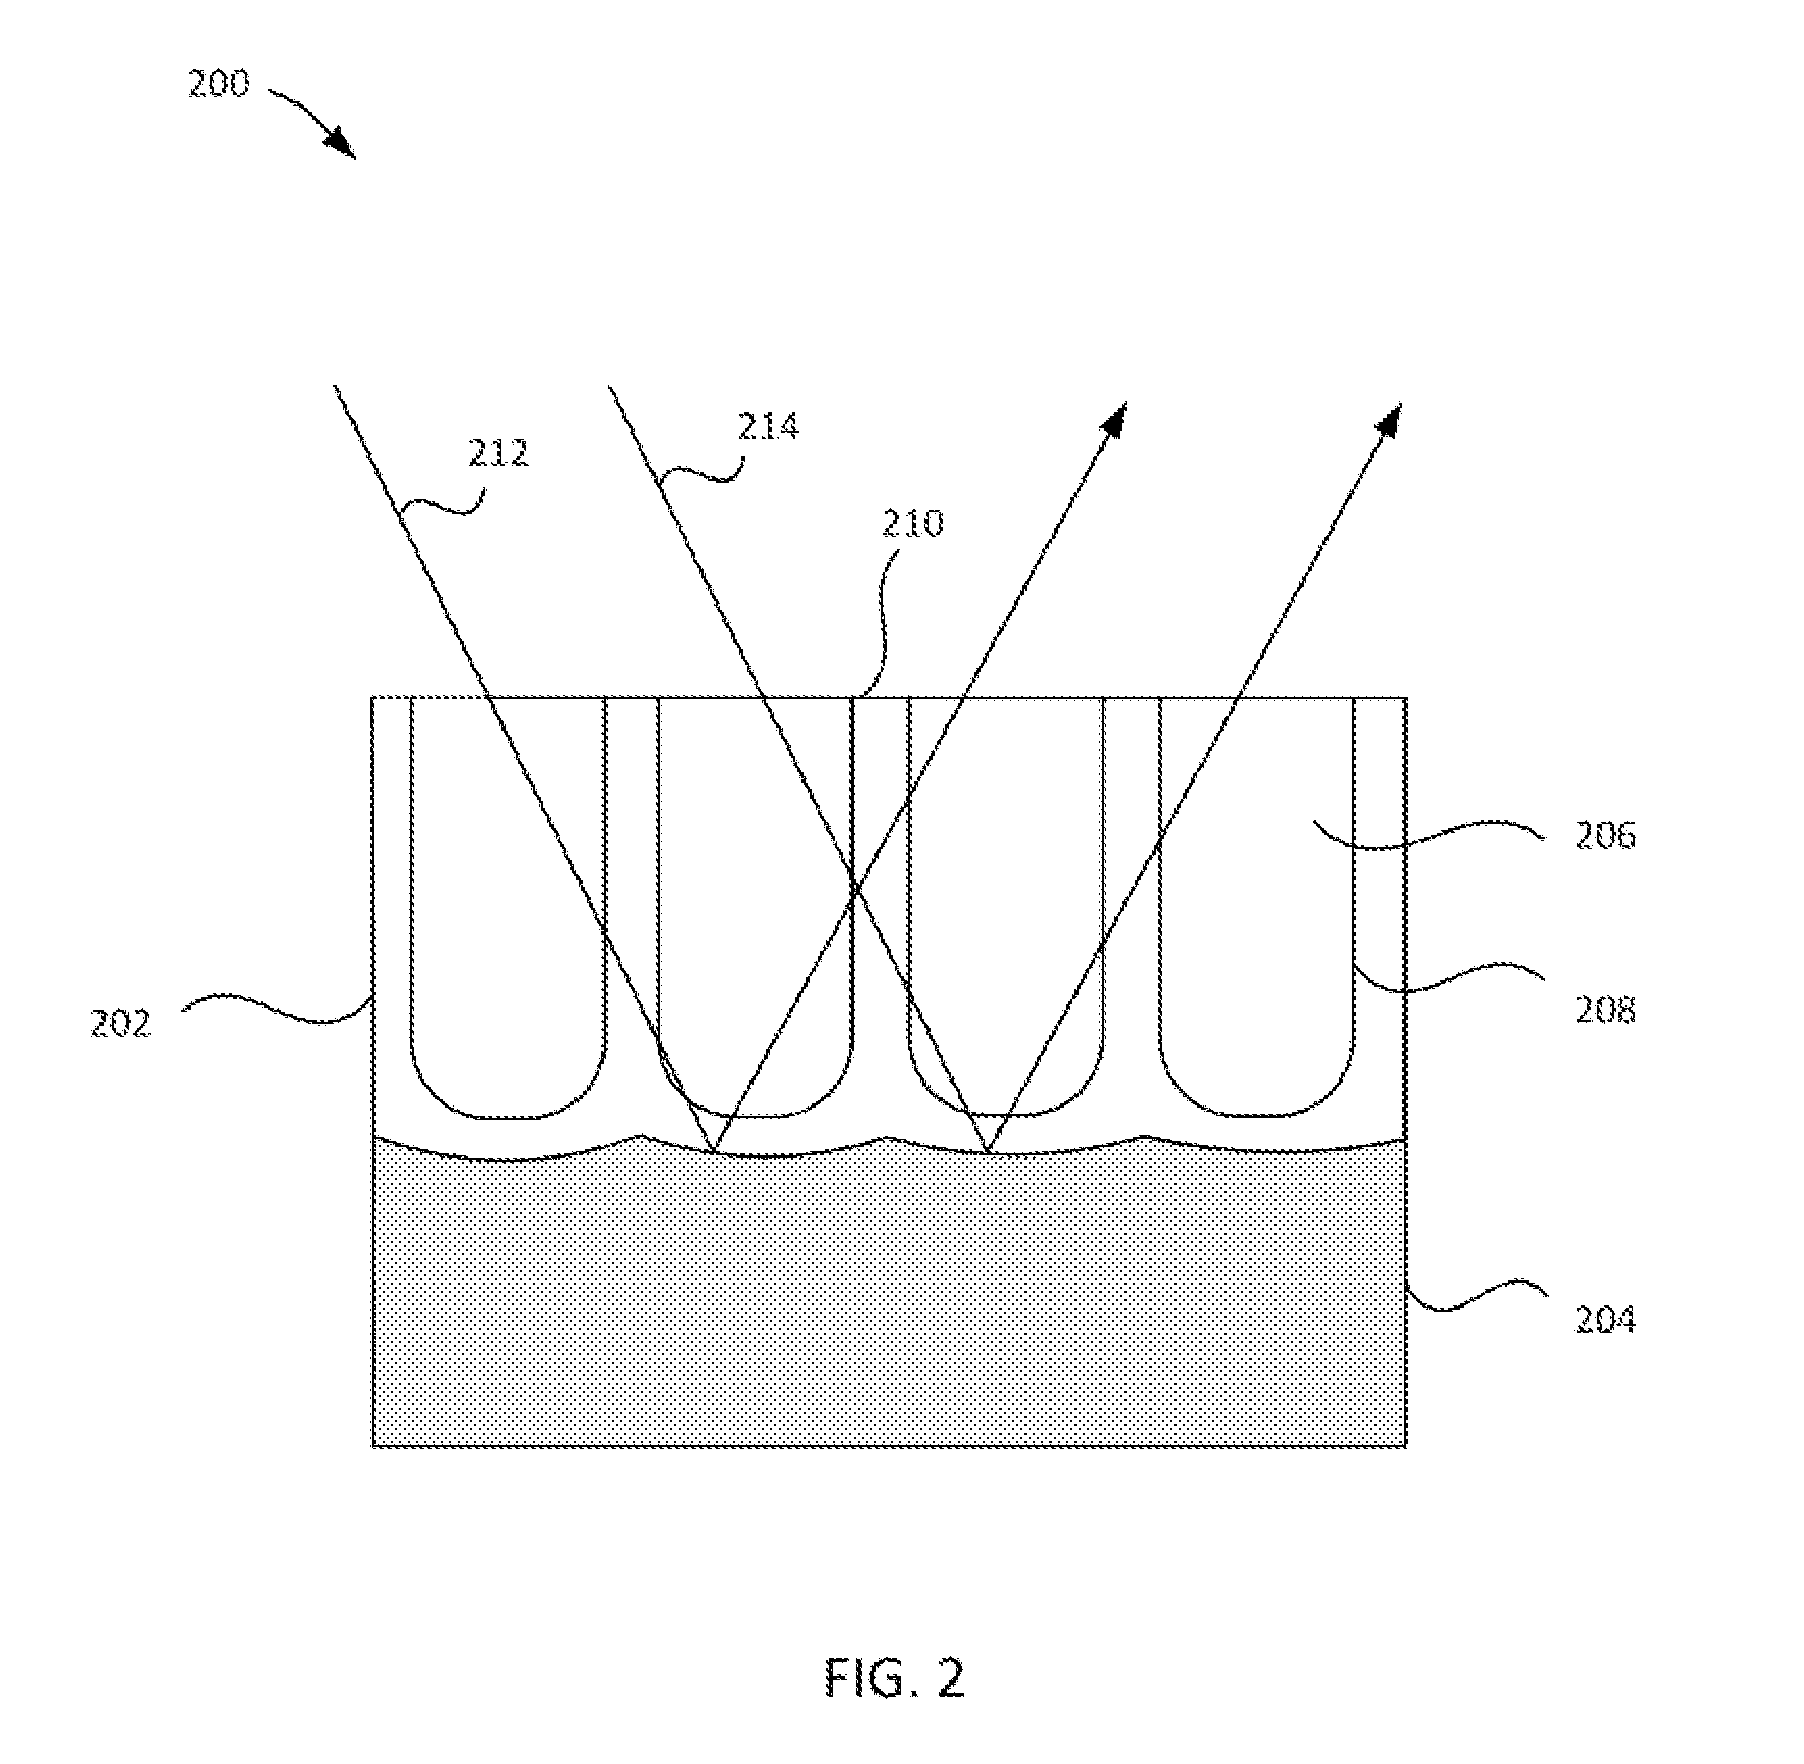 White appearing anodized films and methods for forming the same